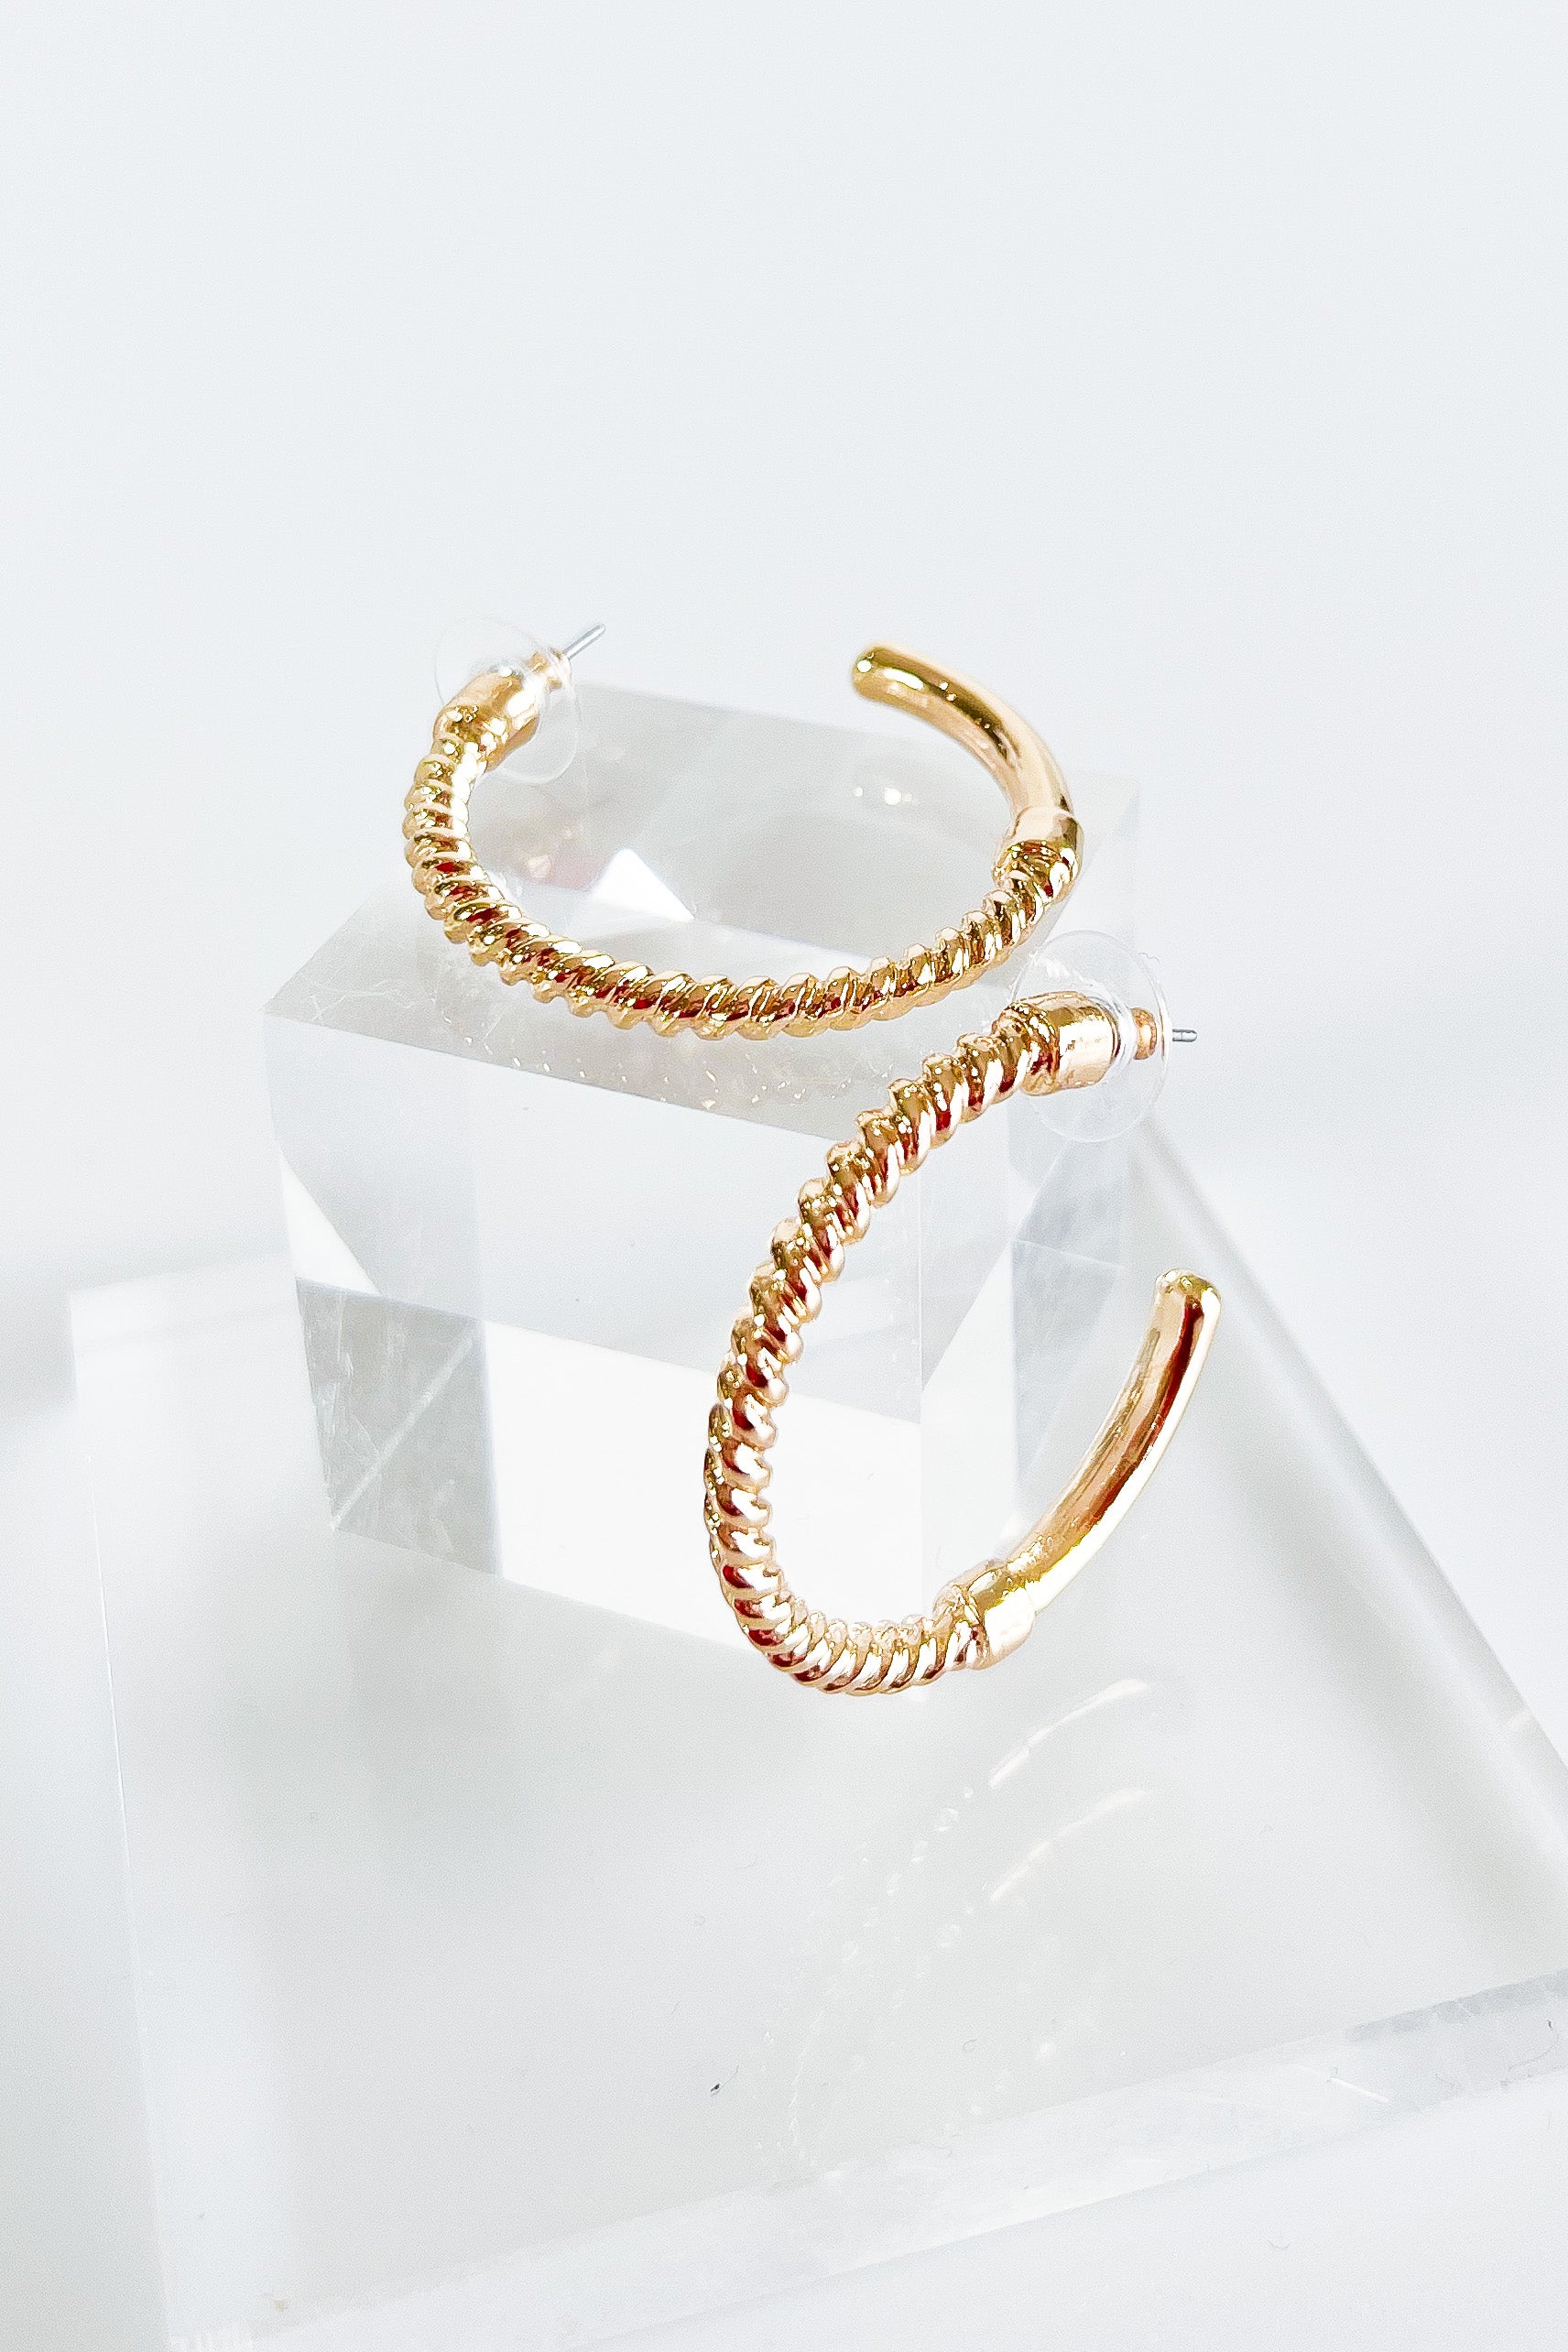 Twisted Rope & Smoothe Hoop Earrings - Medium-230 Jewelry-Golden Stella-Coastal Bloom Boutique, find the trendiest versions of the popular styles and looks Located in Indialantic, FL